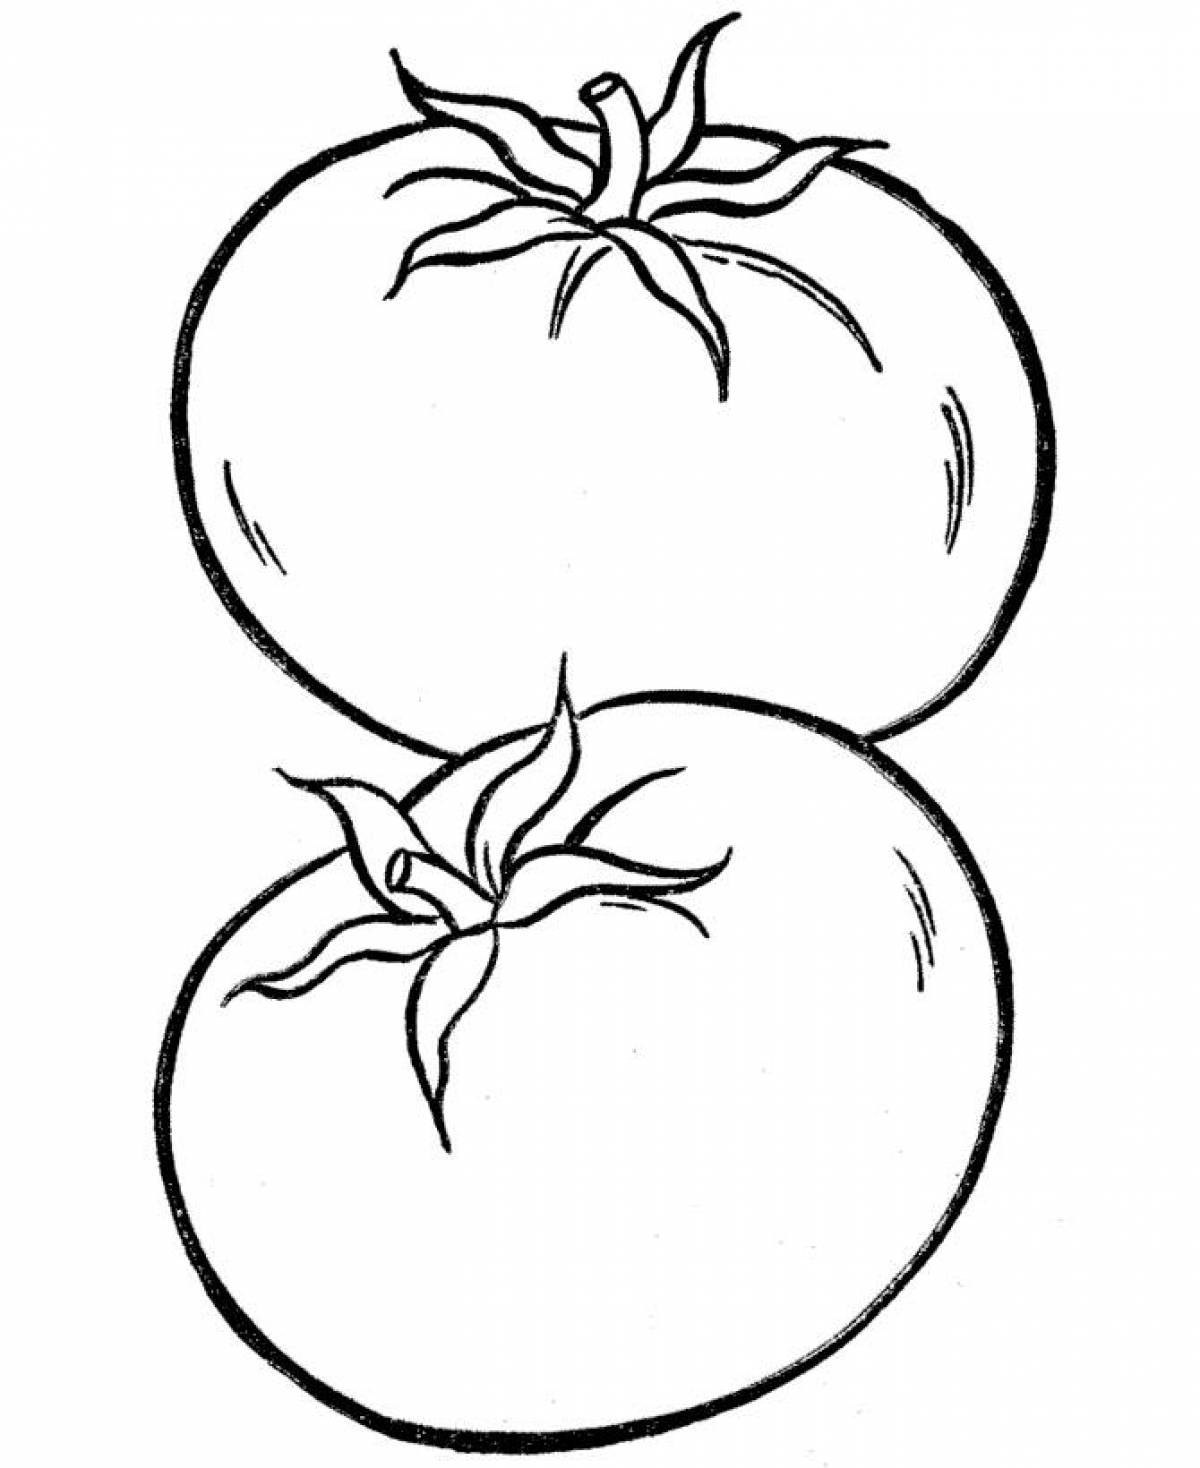 Two tomatoes